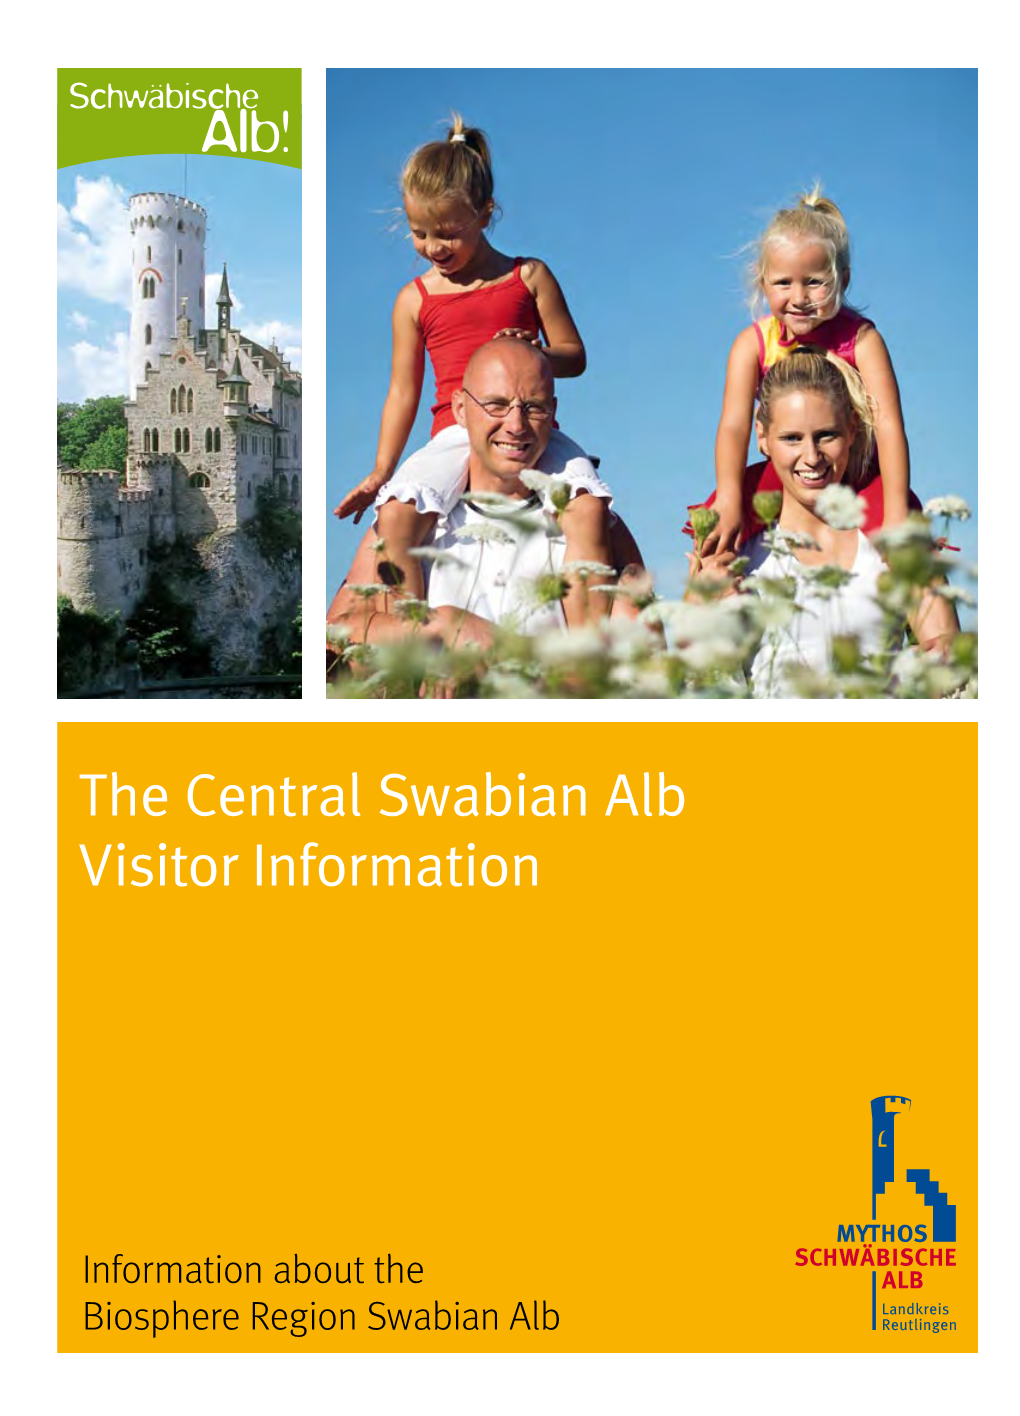 The Central Swabian Alb Visitor Information